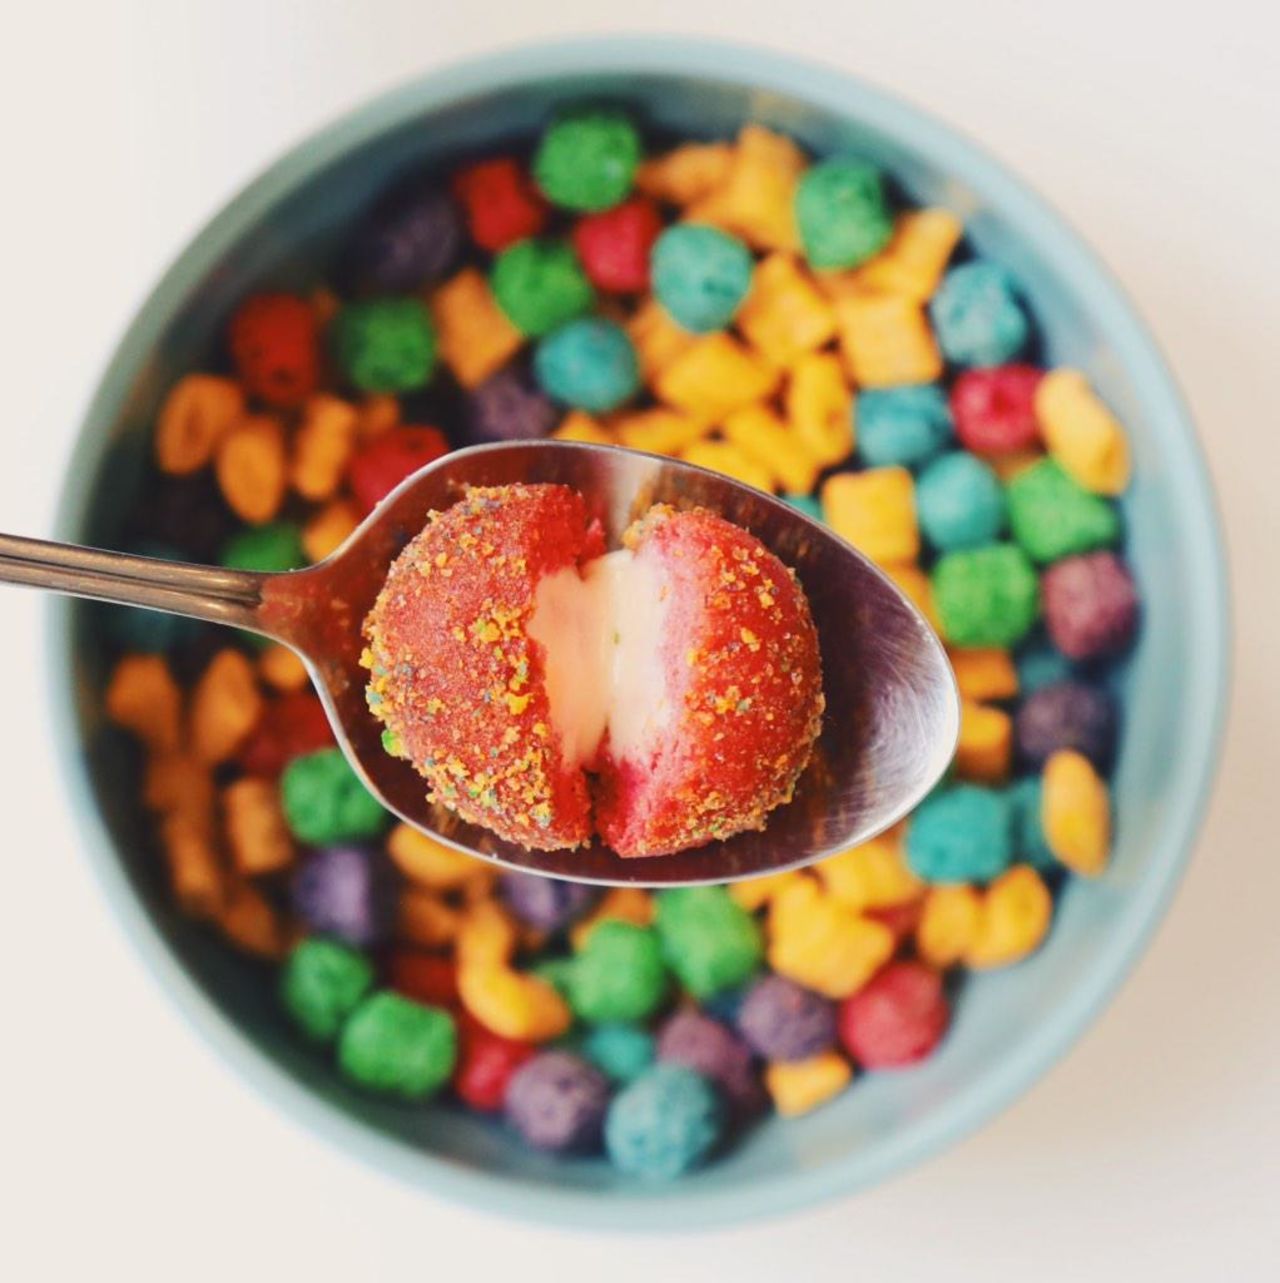 Taco Bell is testing Cap'n Crunch Delights in 26 restaurants in Bakersfield, California. A company spokesman described Cap'n Crunch Delights as "warm, light pastries coated with fruity Cap'n Crunch Berries cereal and filled with creamy, sweet milk icing."